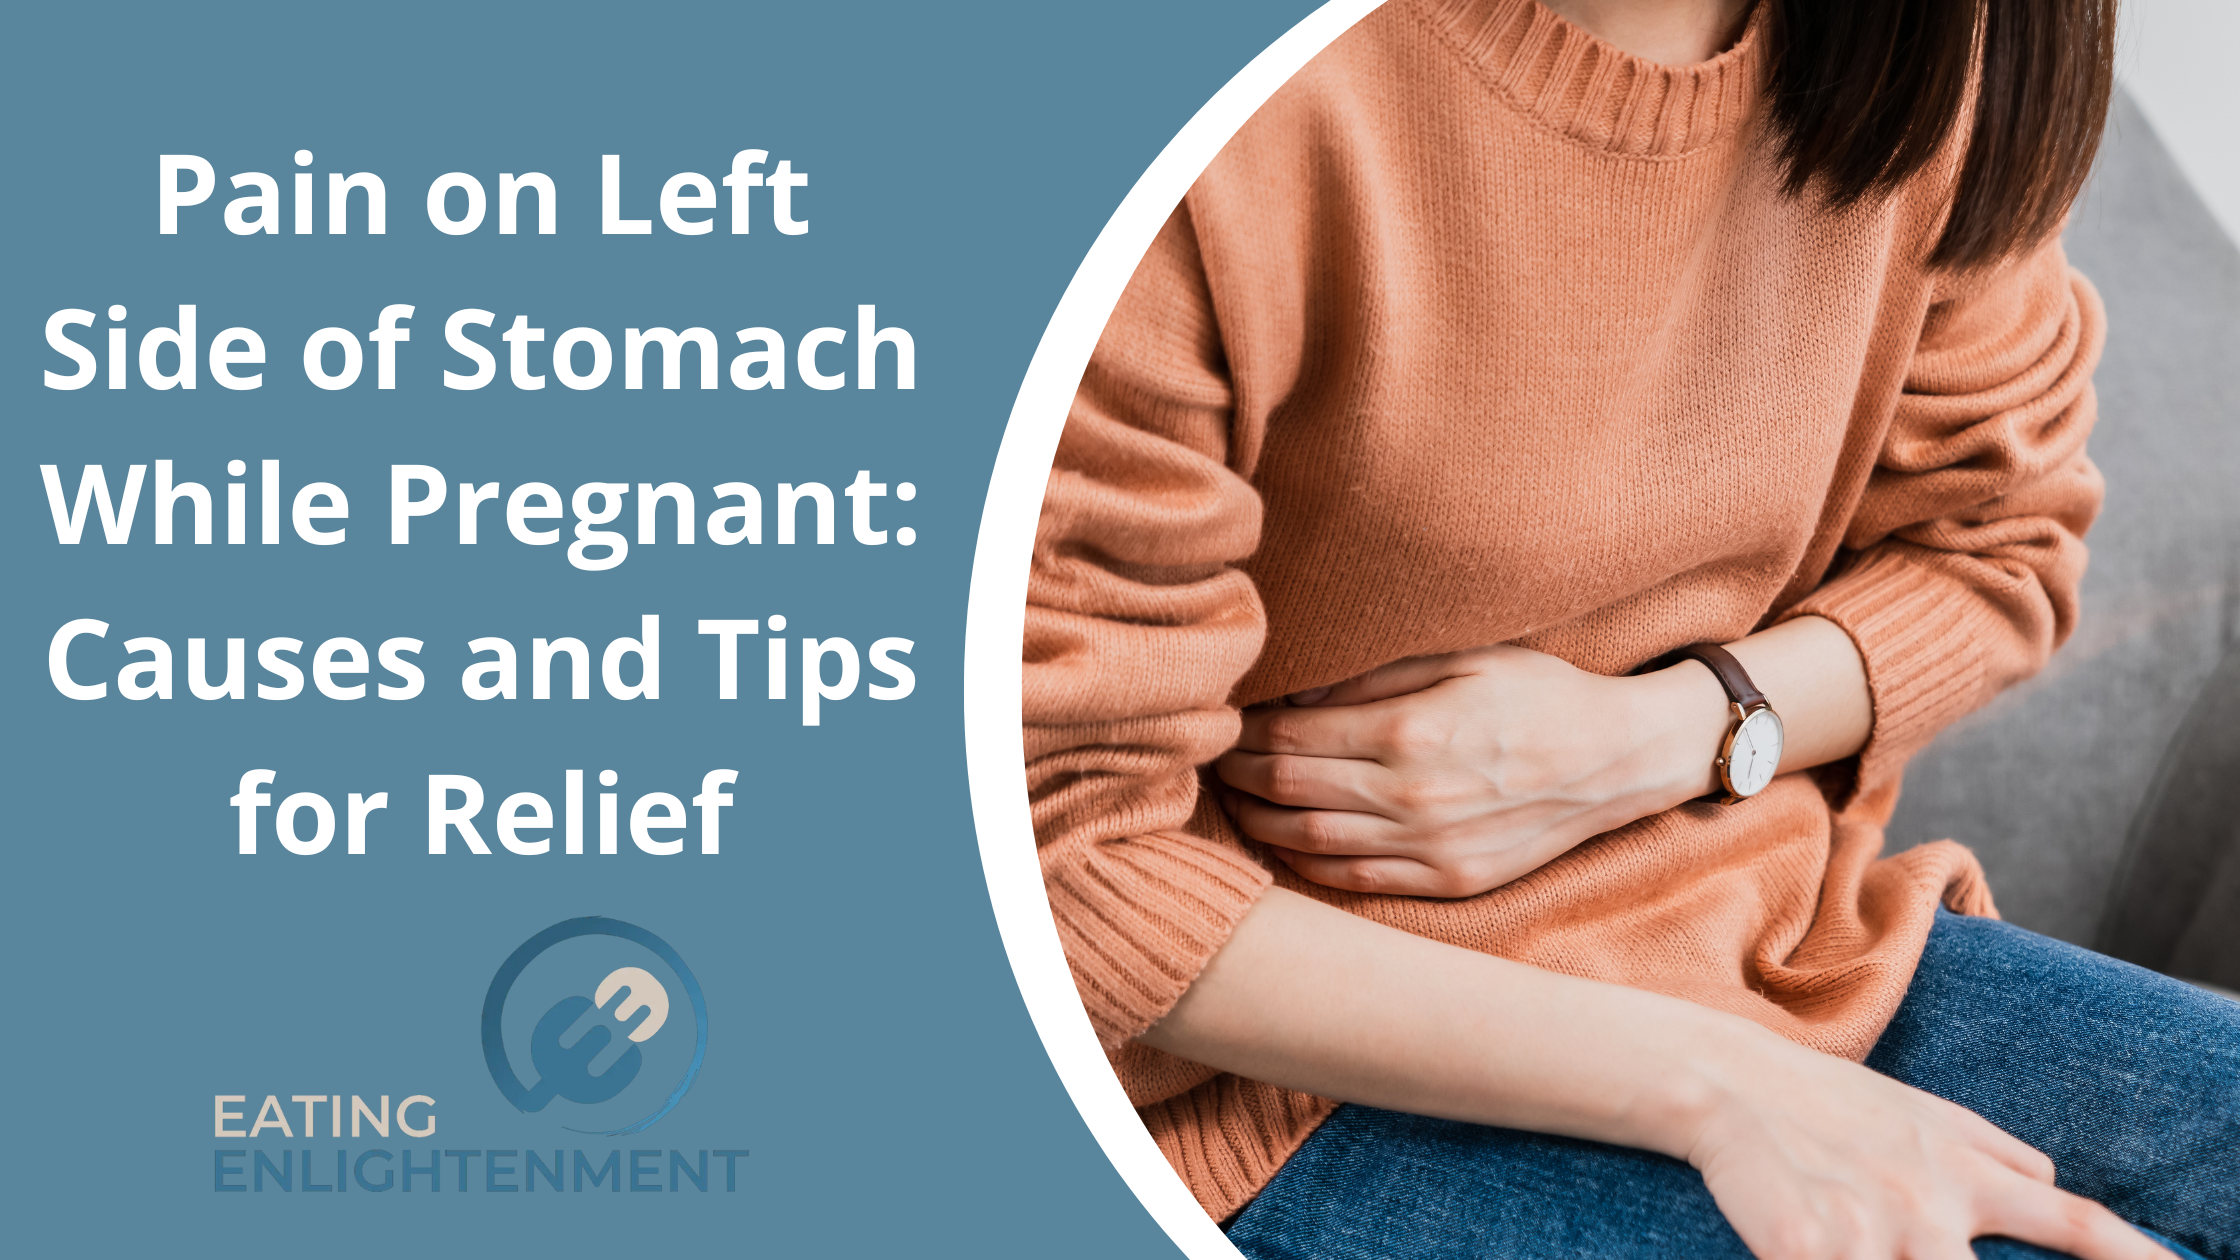 Pain on Left Side of Stomach While Pregnant: Causes and Tips for Relief